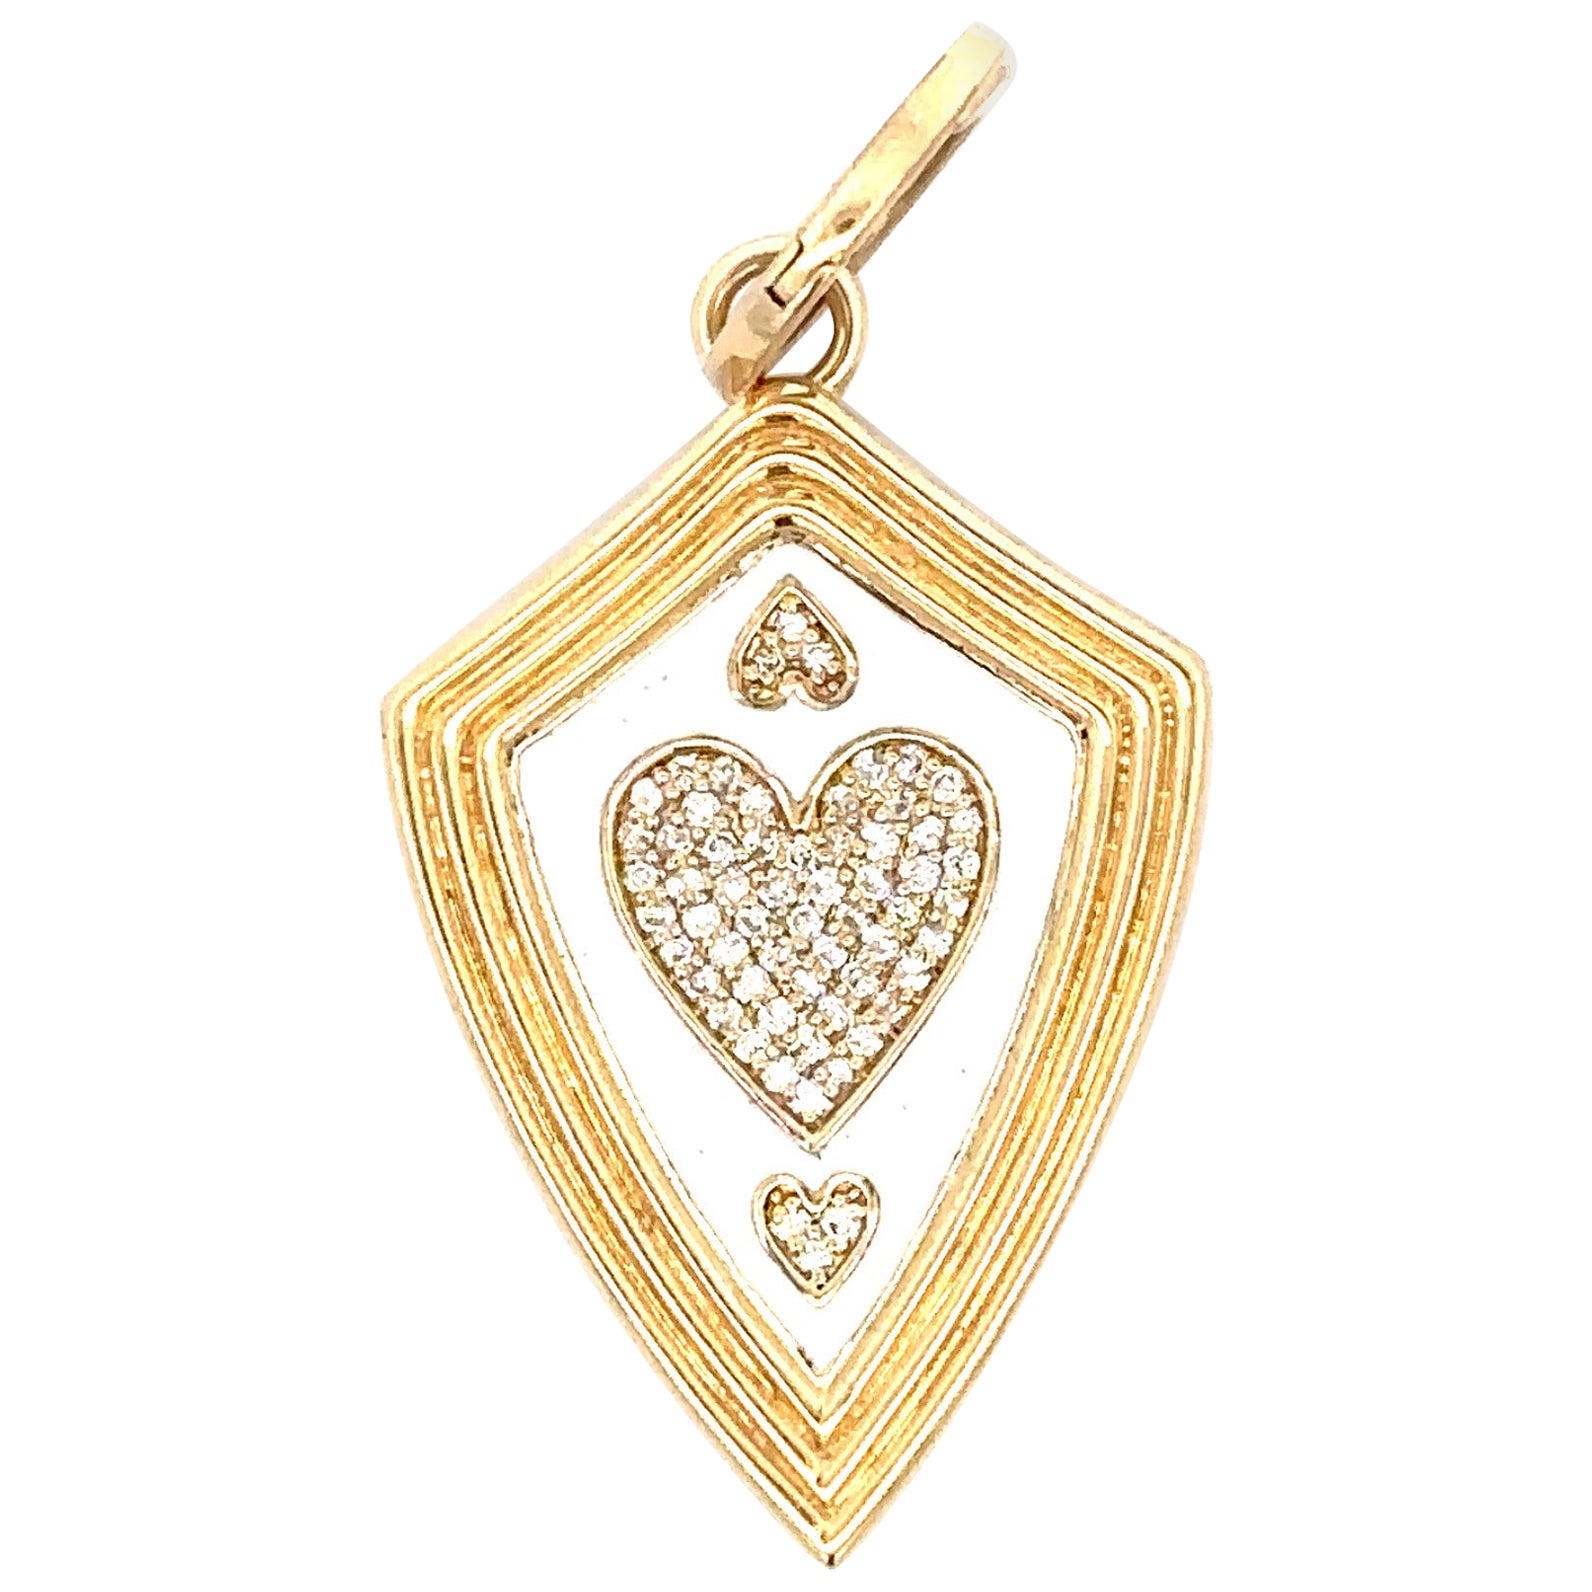 One of a Kind White Ceramic Pavé Heart Shield Hinged Charm - Y14 For Sale